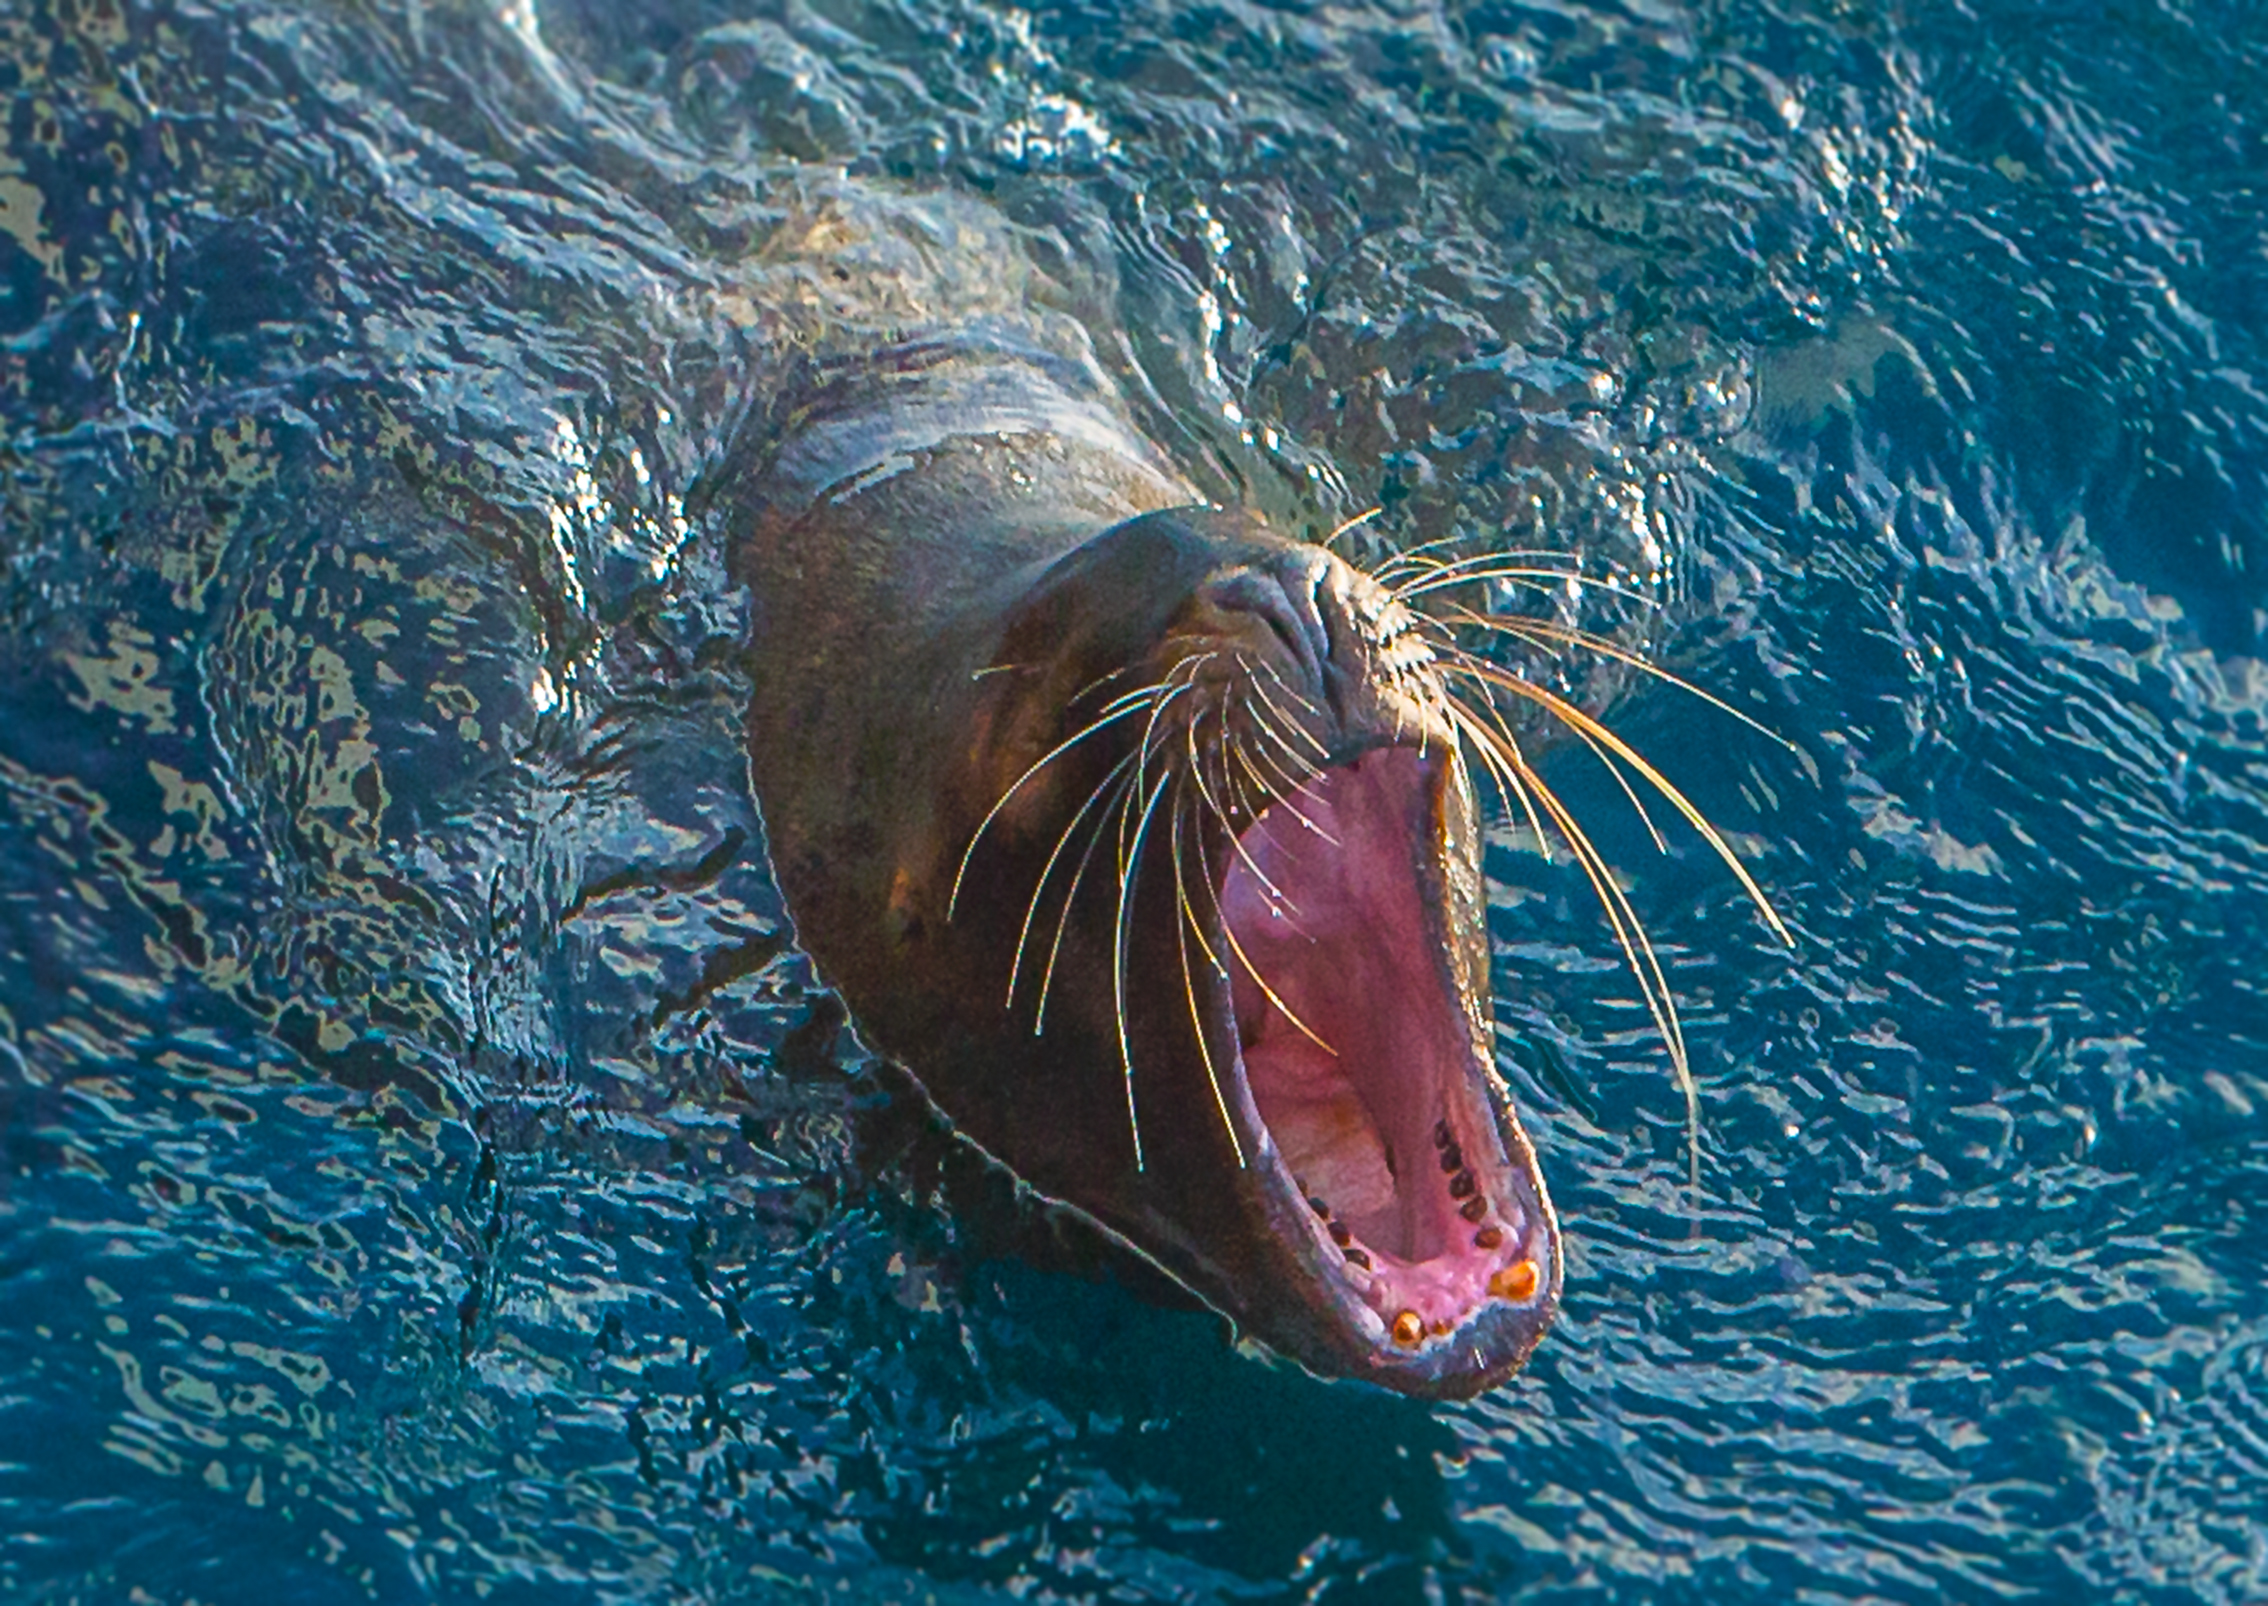 Sea lion_The yelling continues